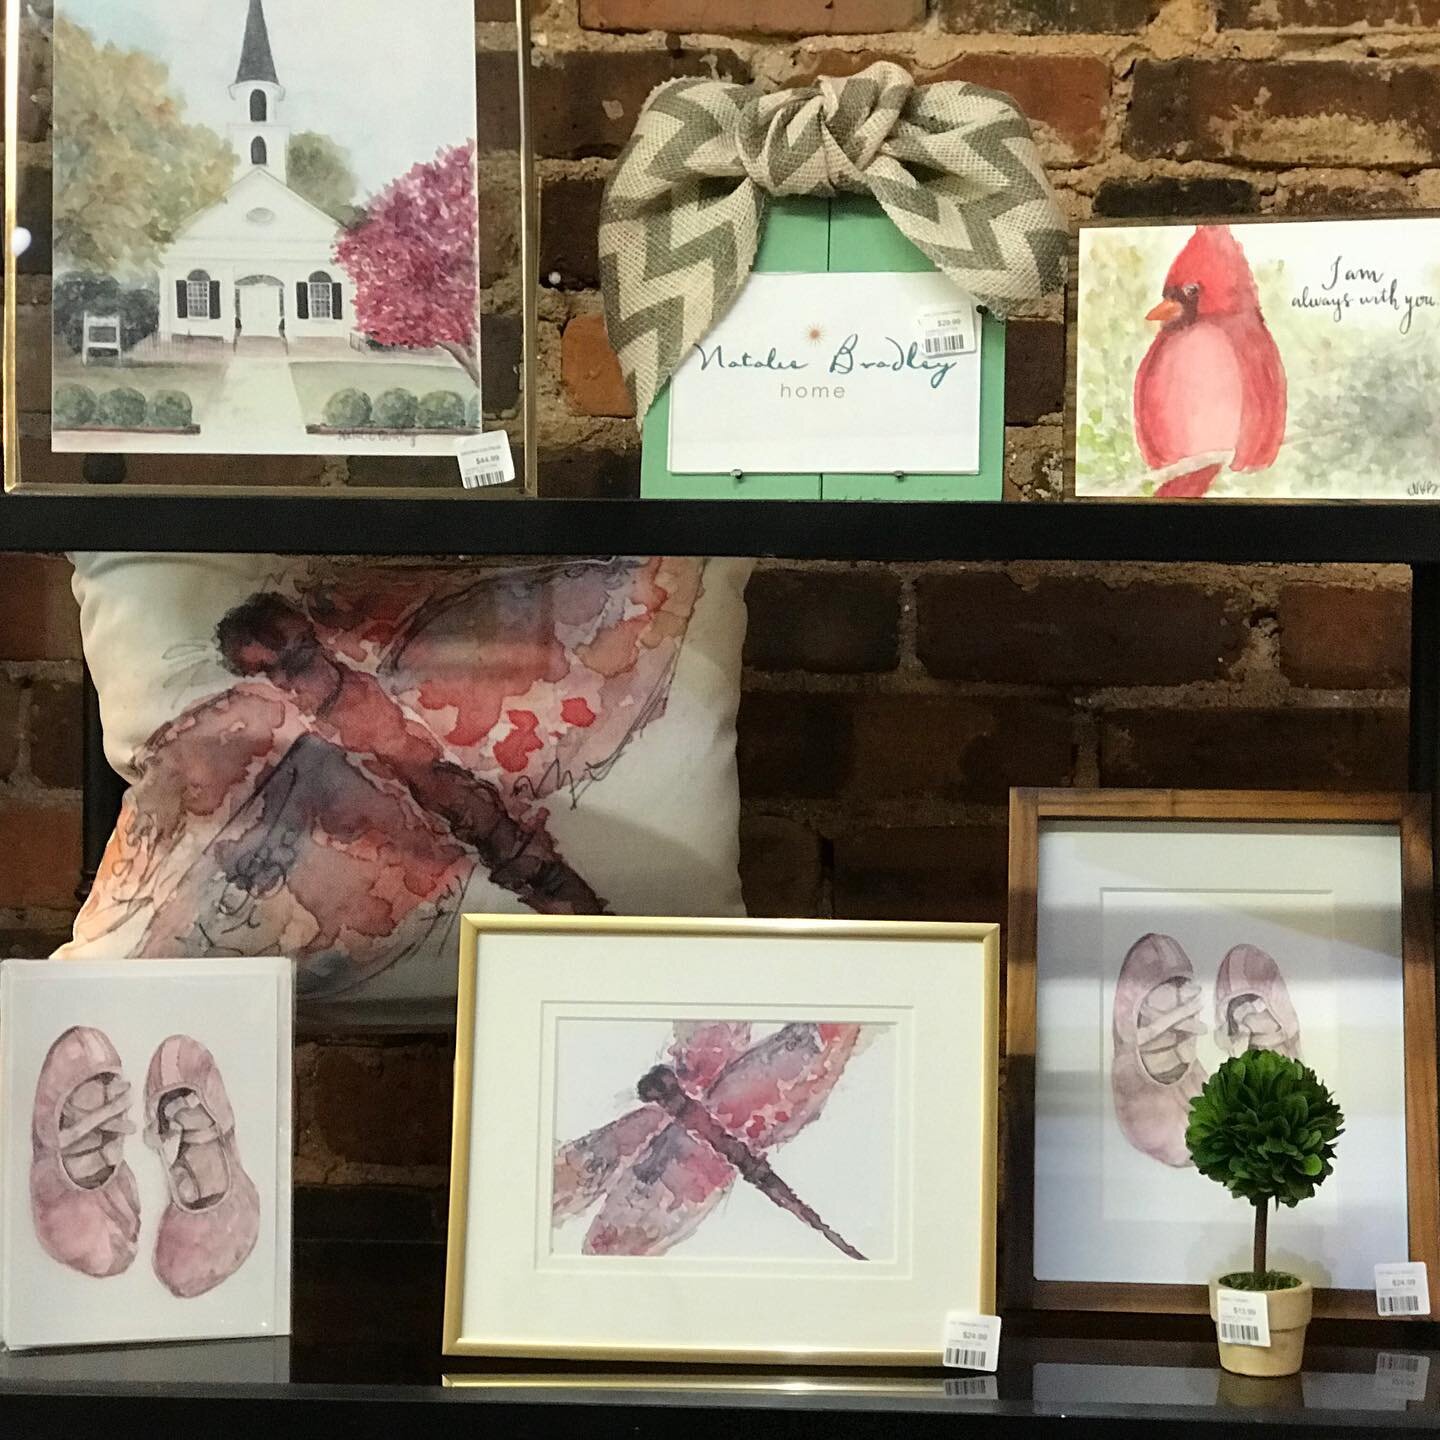 Home Decor, Gifts from Natalie Bradley Home at The Washington Collective.jpg